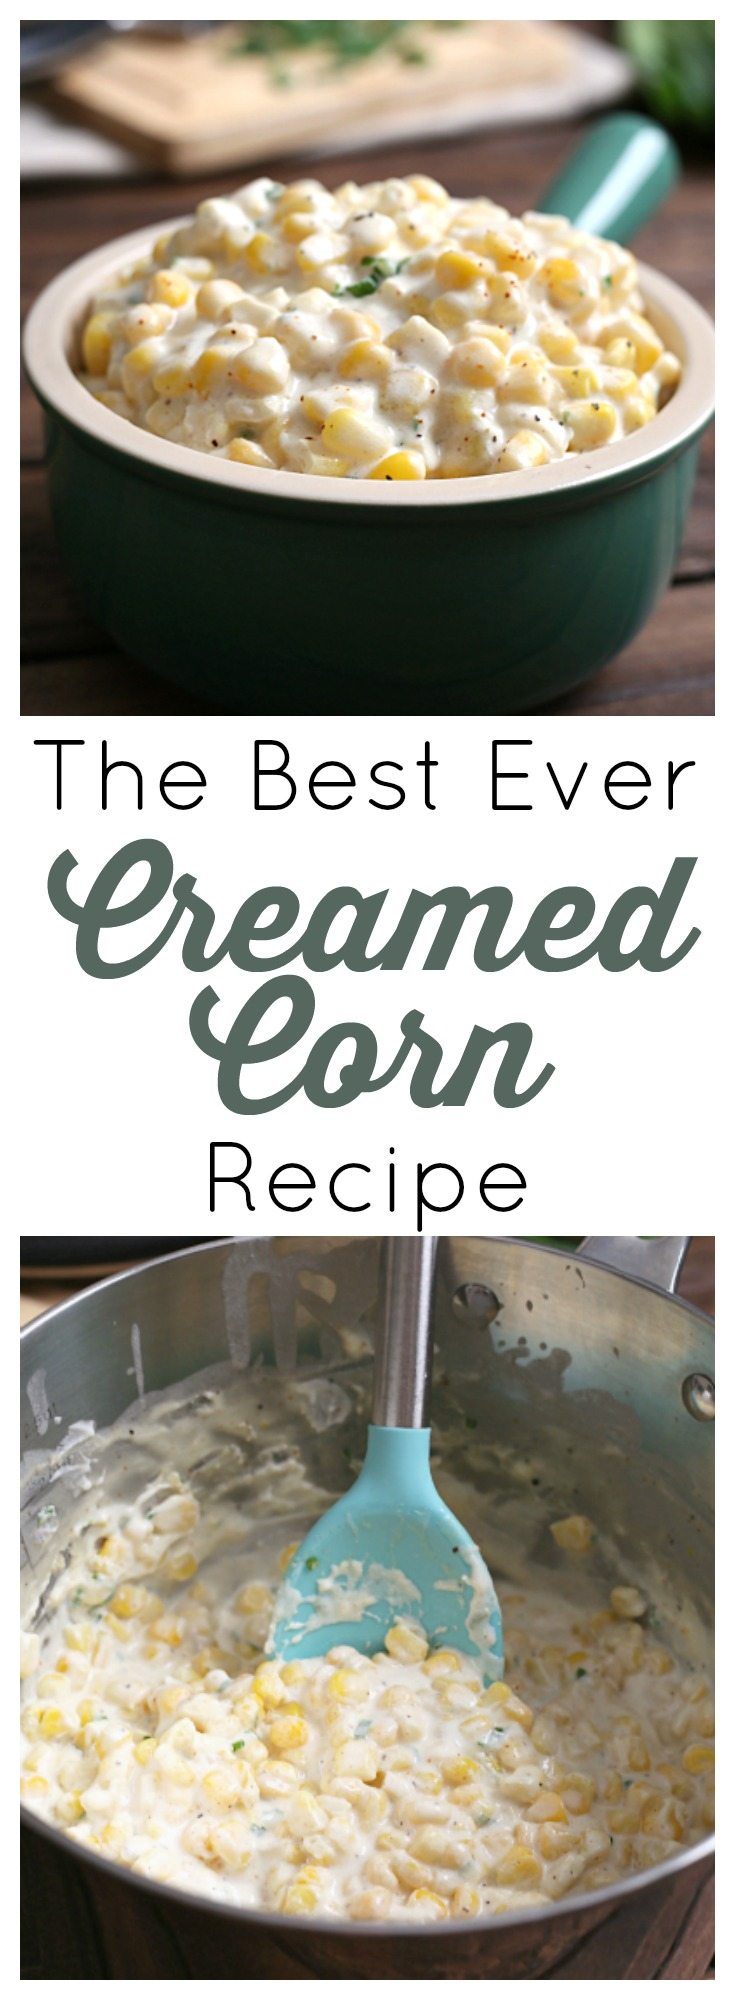 Best Ever Creamed Corn Recipe - Grace and Good Eats